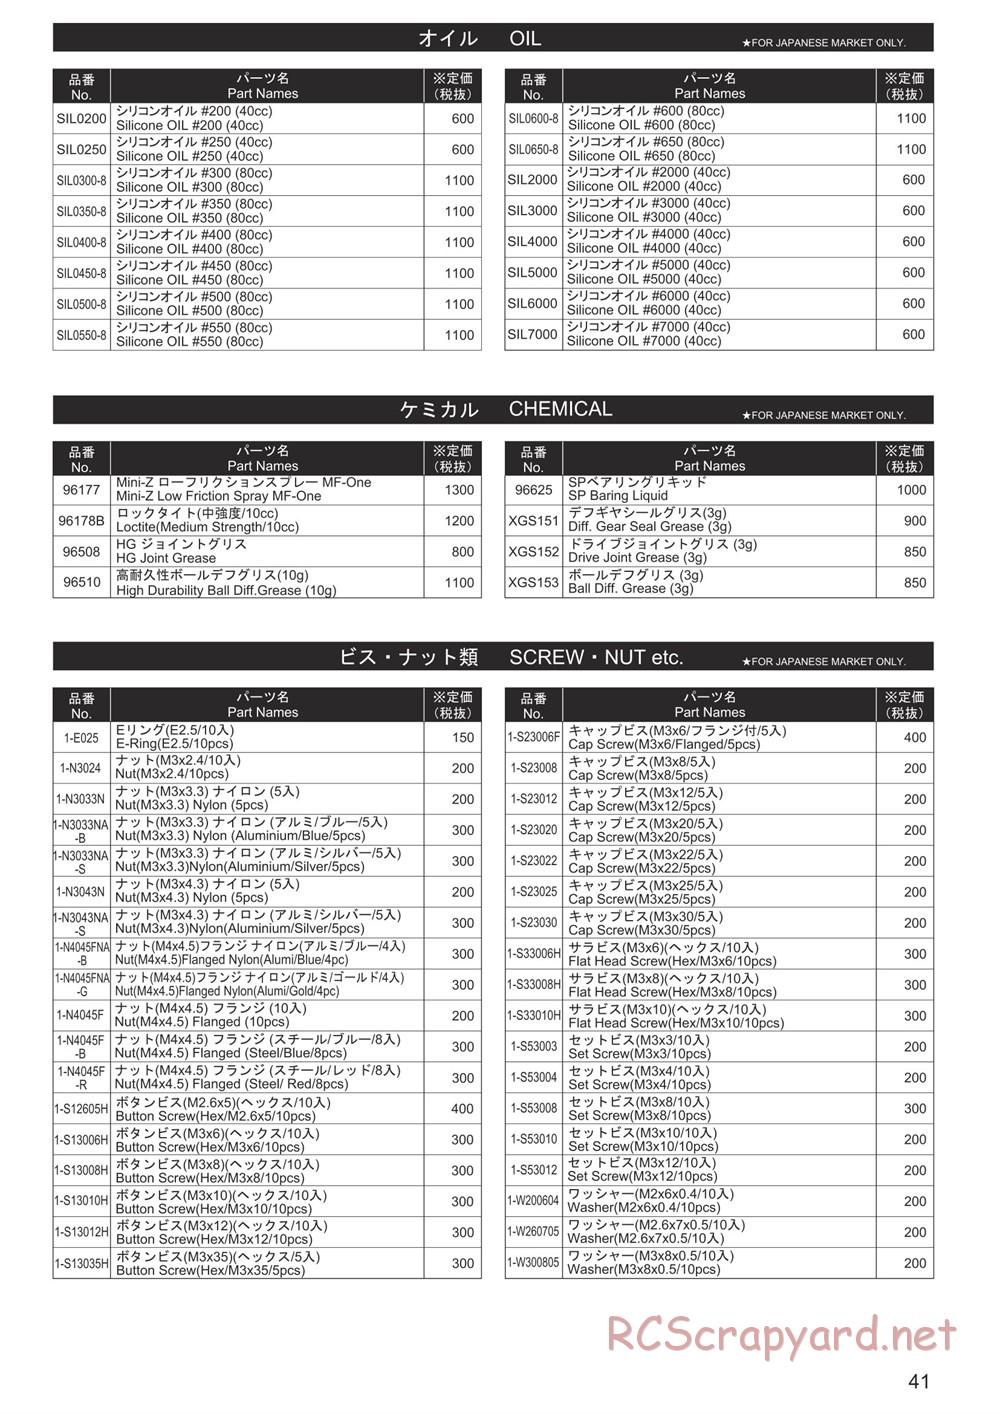 Kyosho - Ultima RB7 - Manual - Page 41